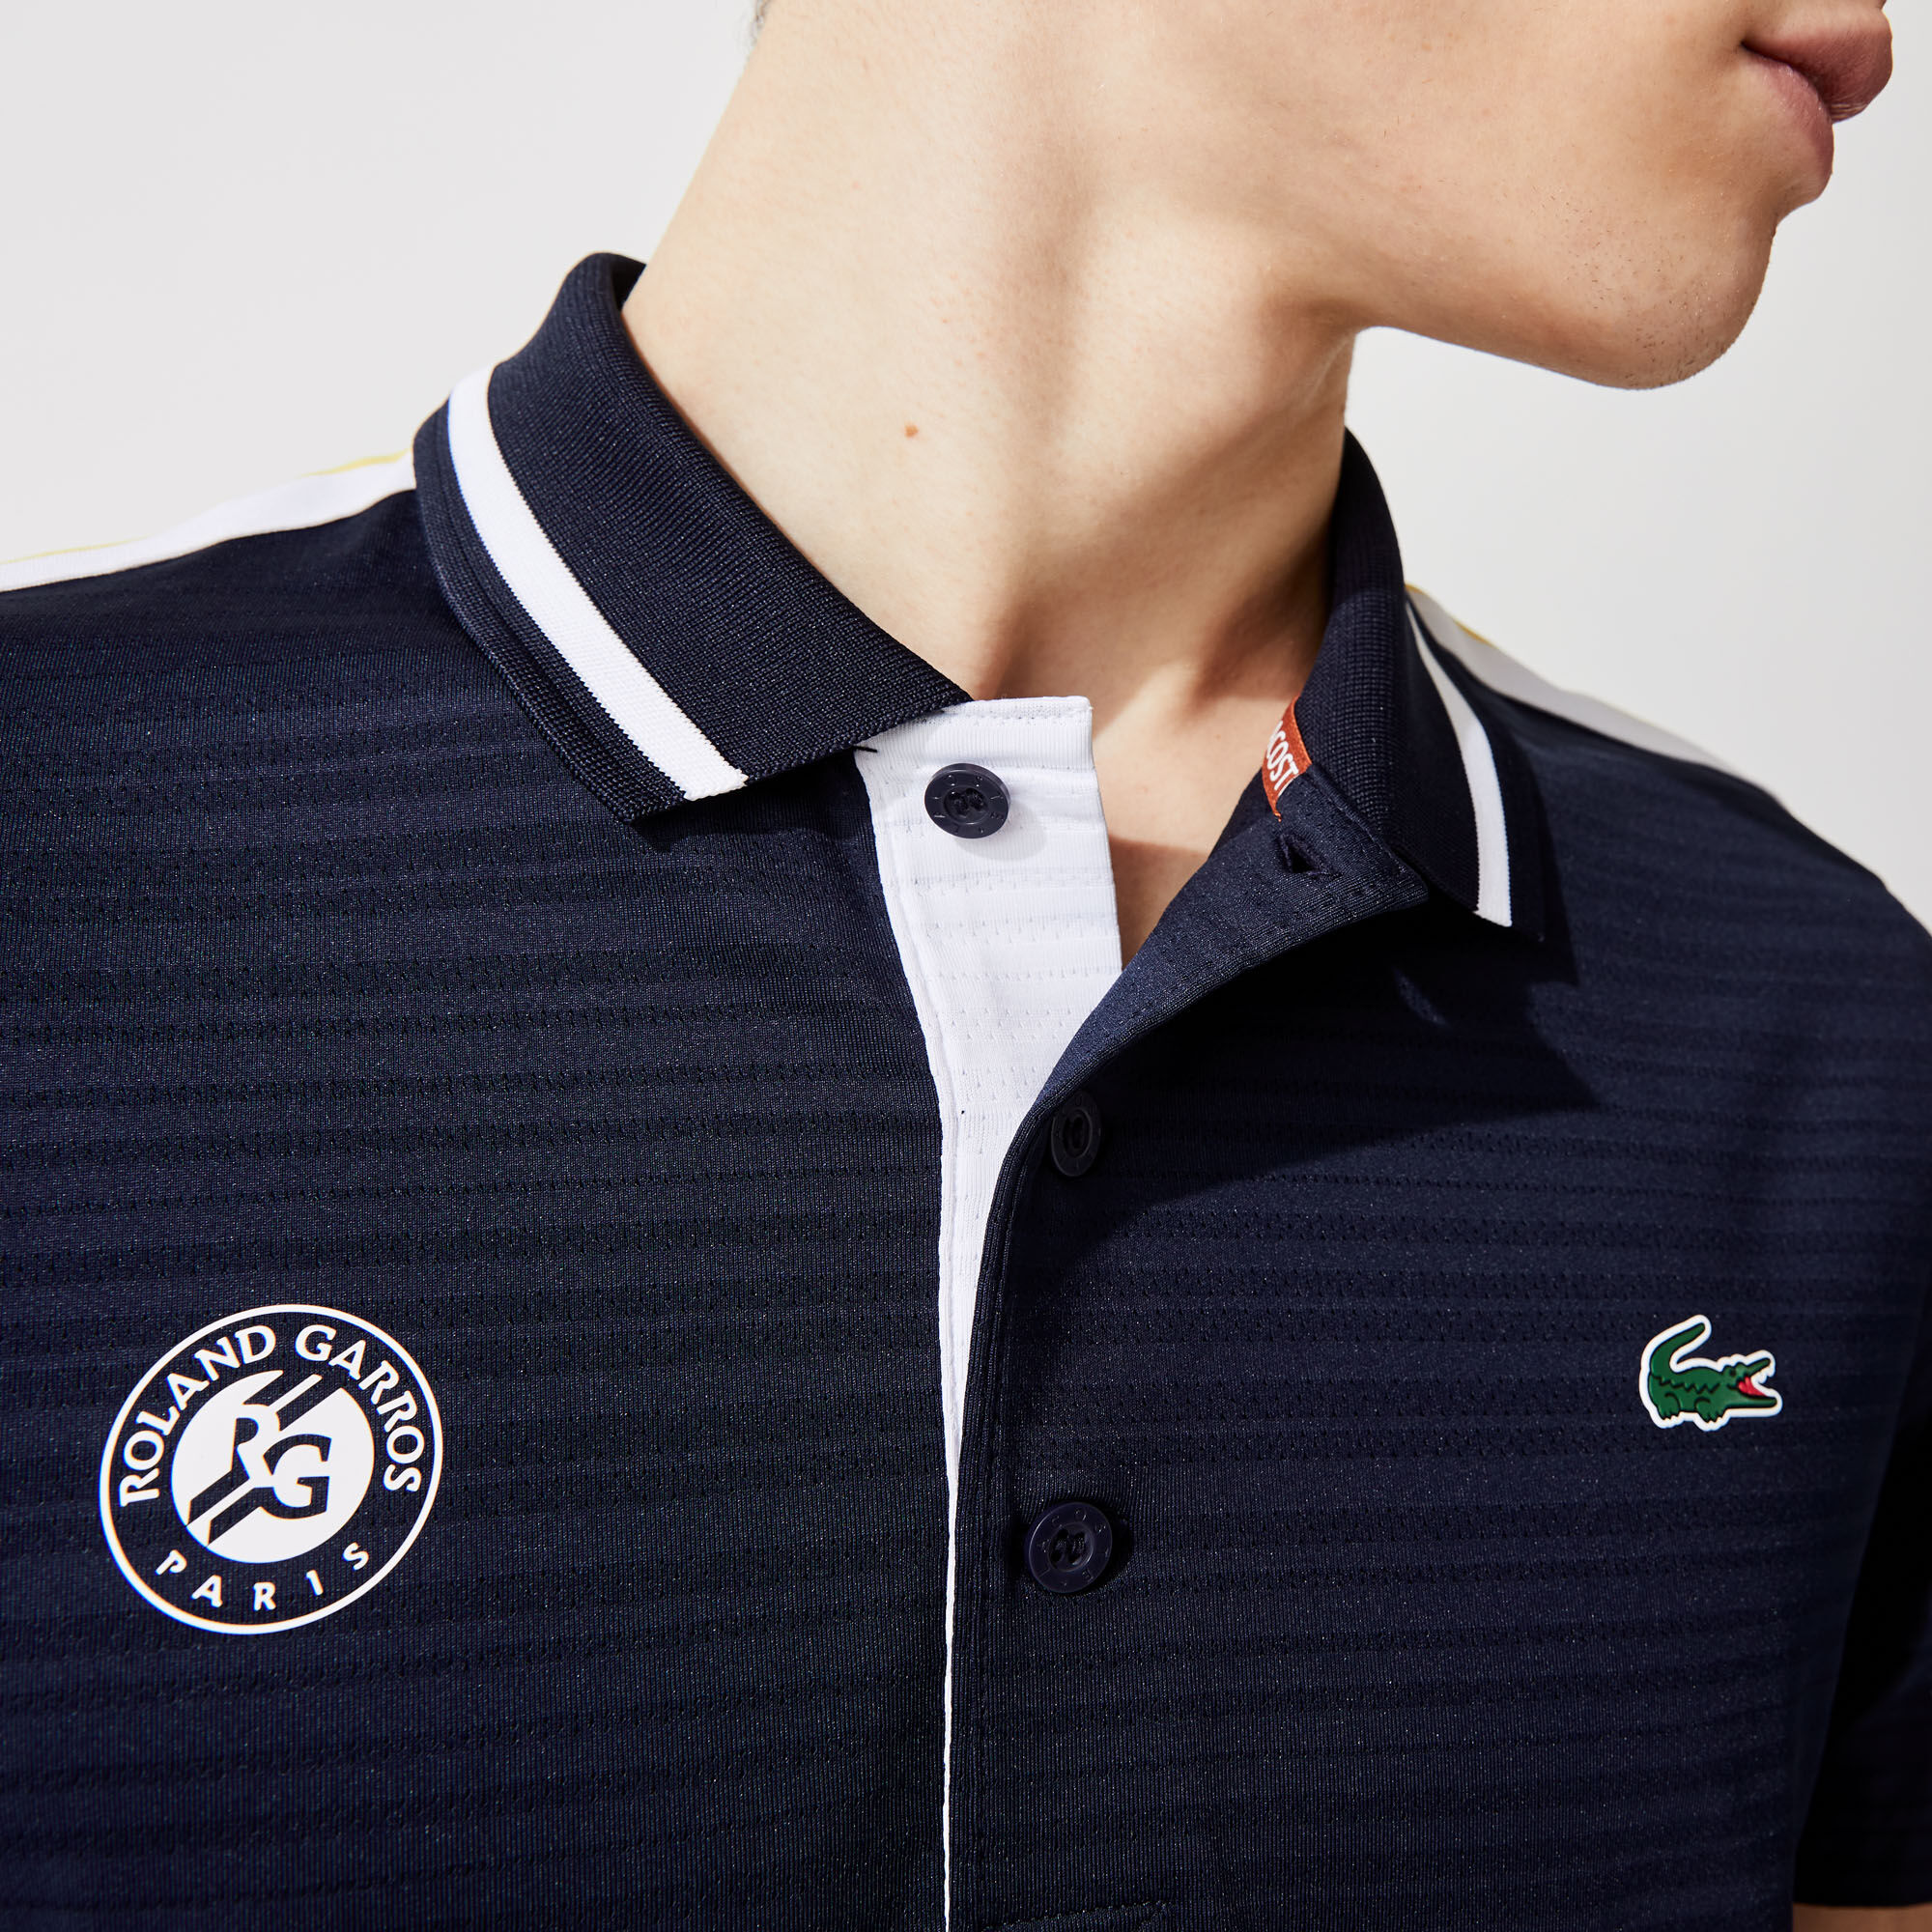 Men’s Lacoste SPORT French Open Edition Second-Skin Polo Shirt